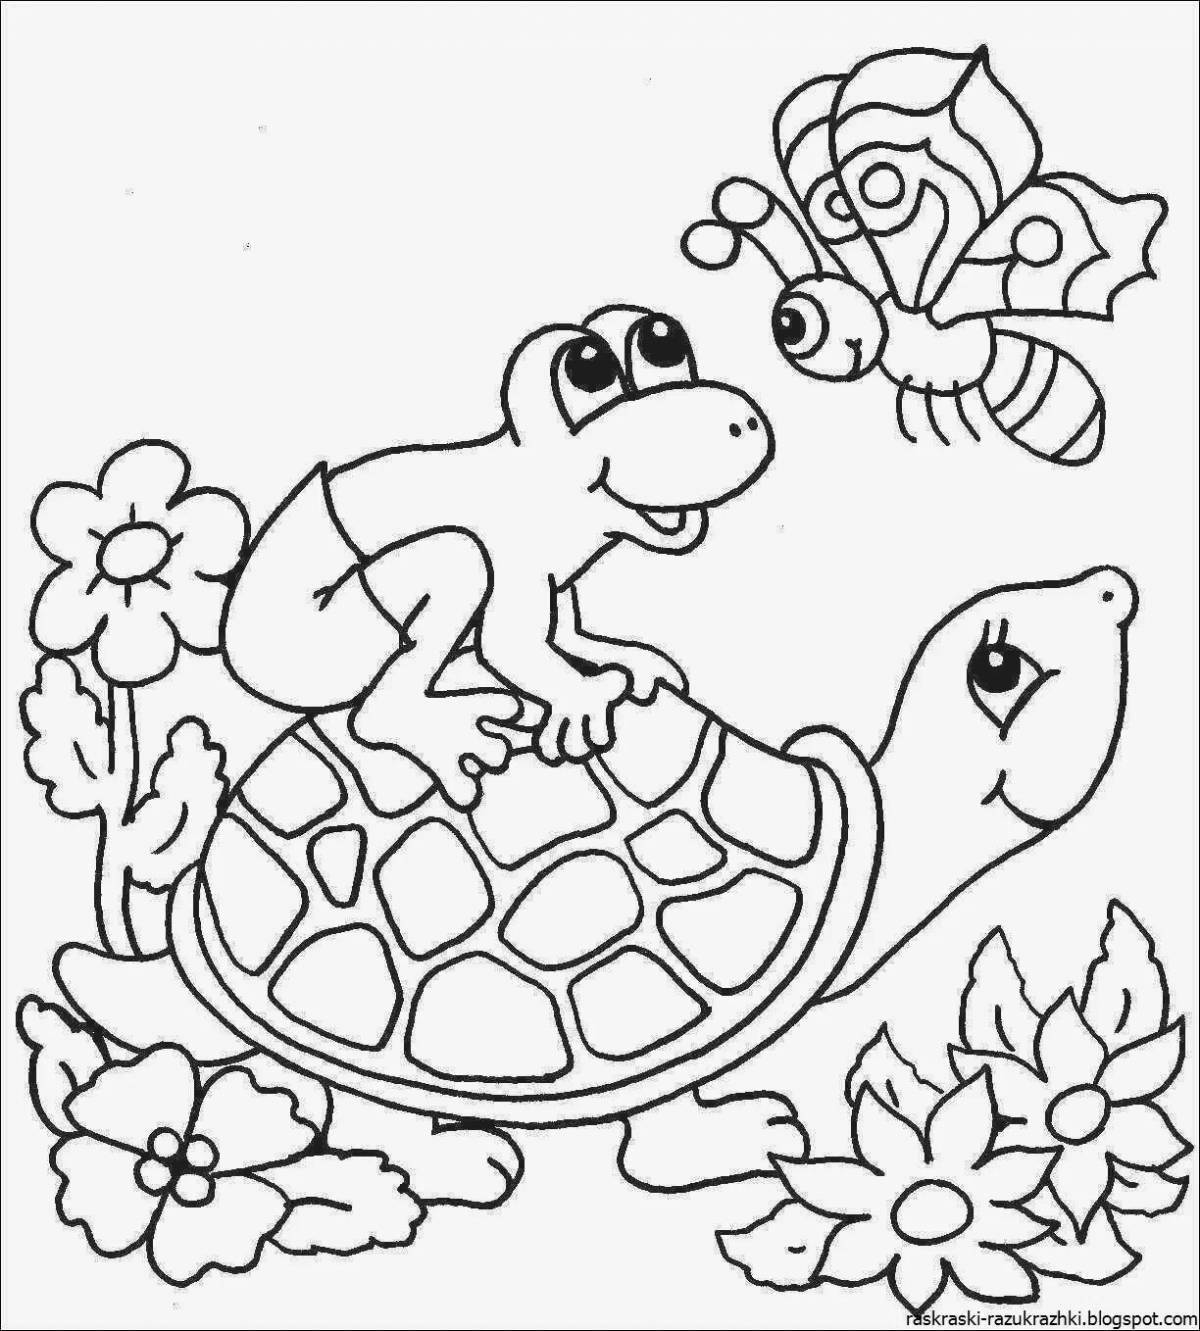 Wavy turtle coloring pages for kids